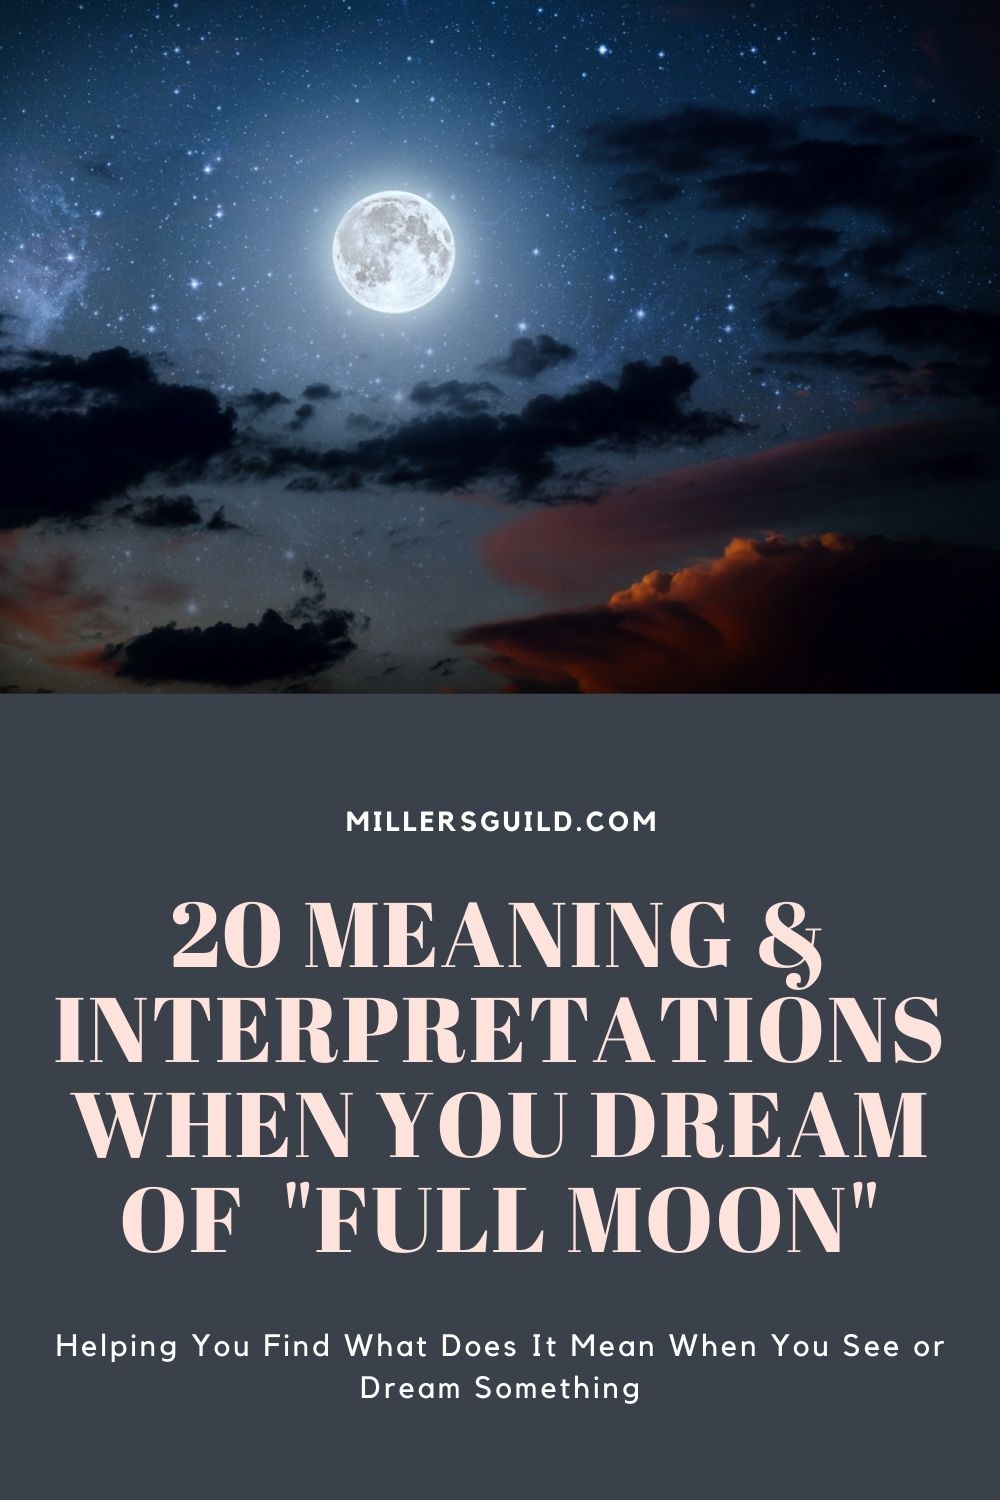 2 Dreams Of A Blood Moon And Spiritual Meaning